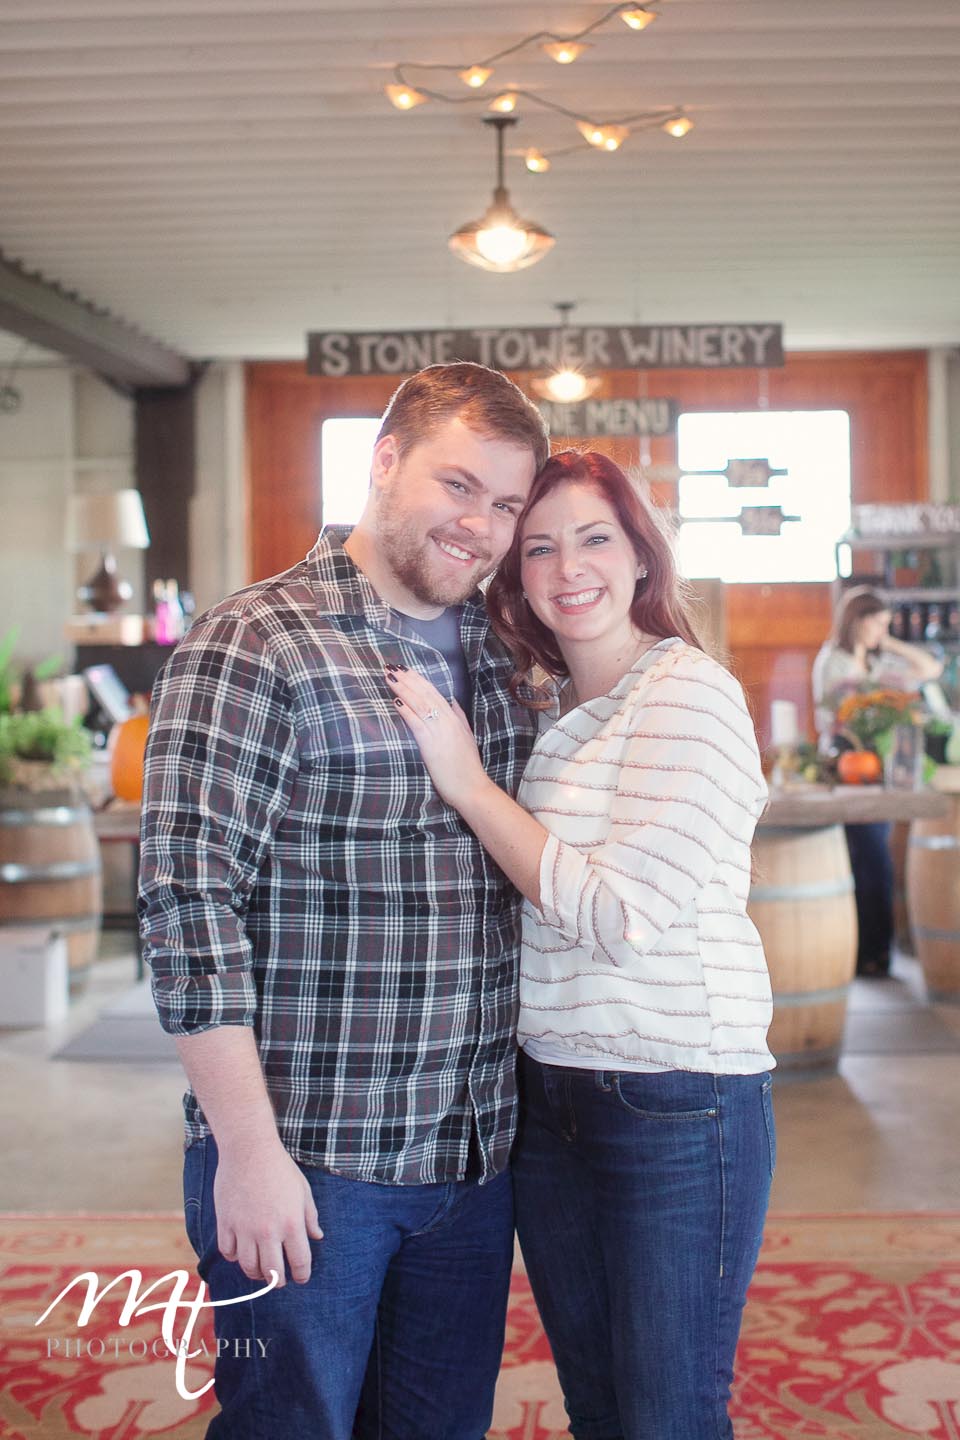 Stone Tower Winery suprise proposal engagement photography